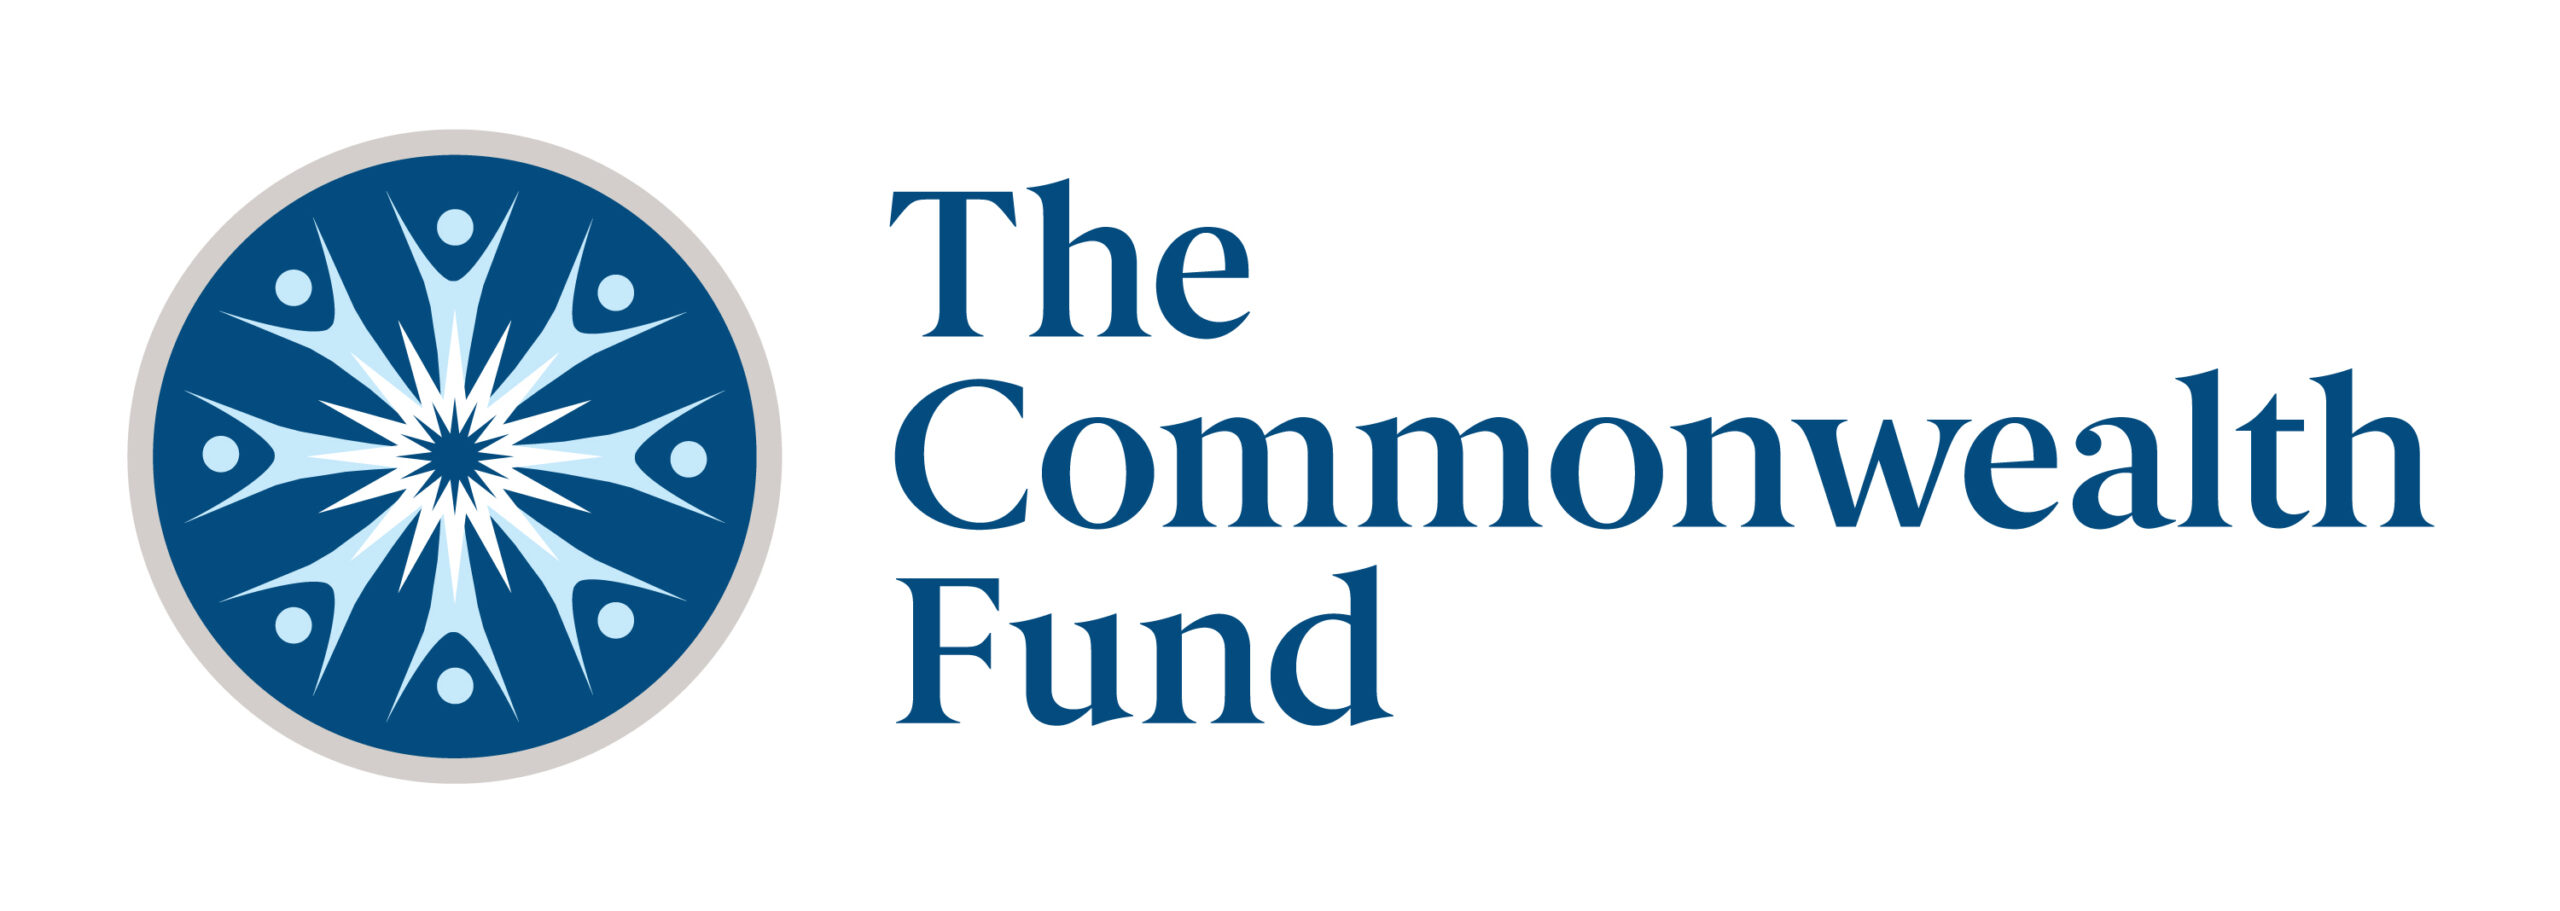 The Commonwealth Fund